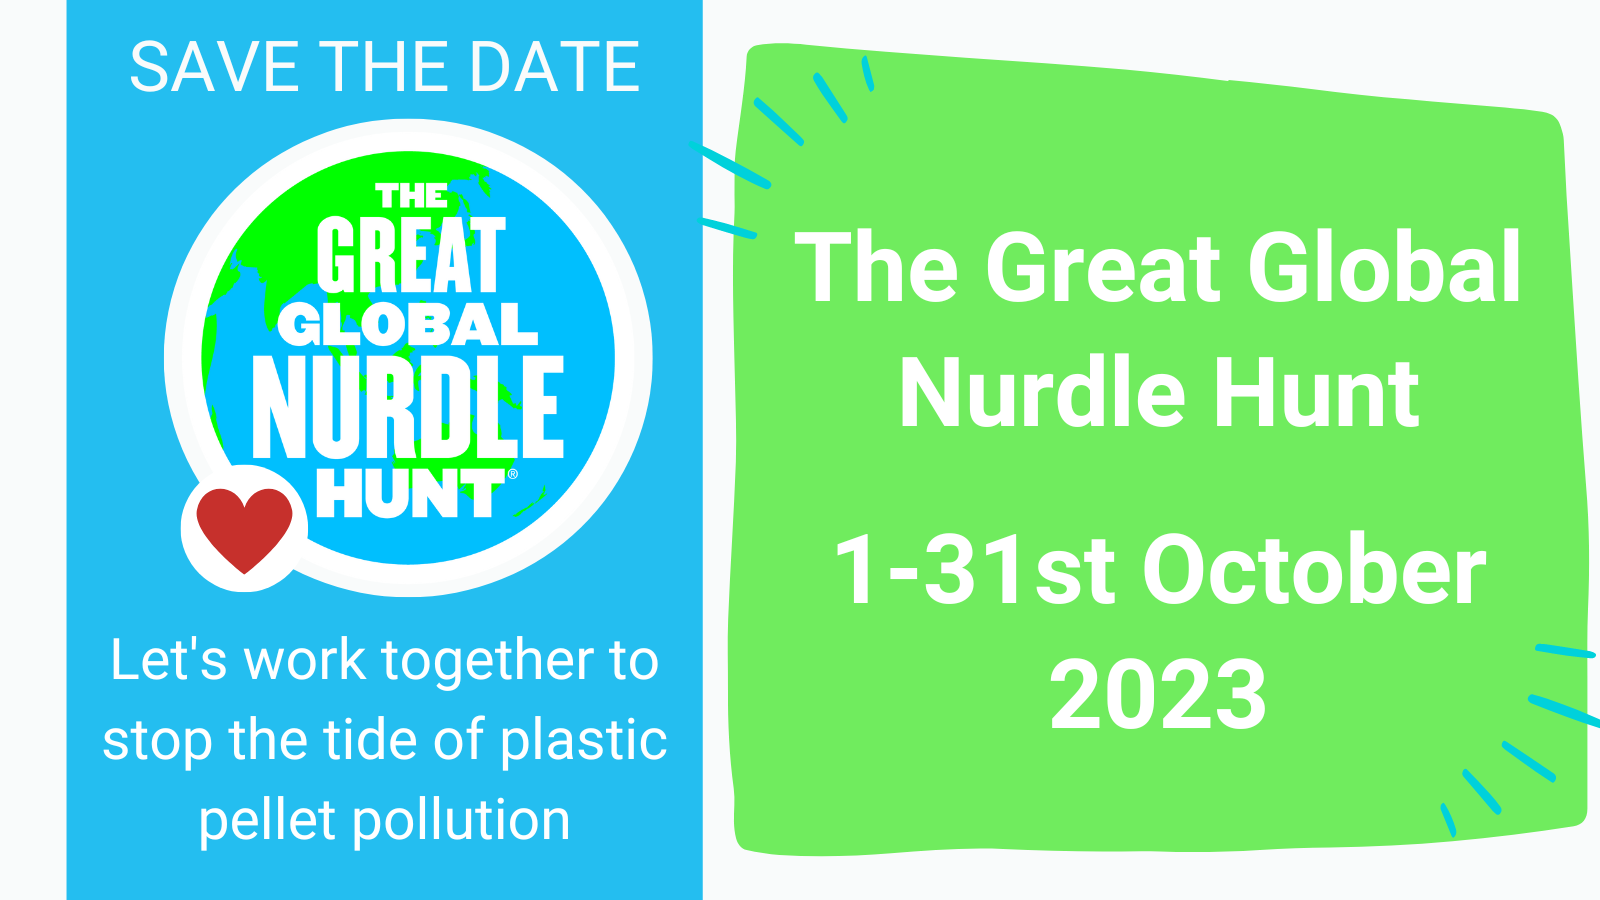 The Great Global Nurdle Hunt 1st-31st October